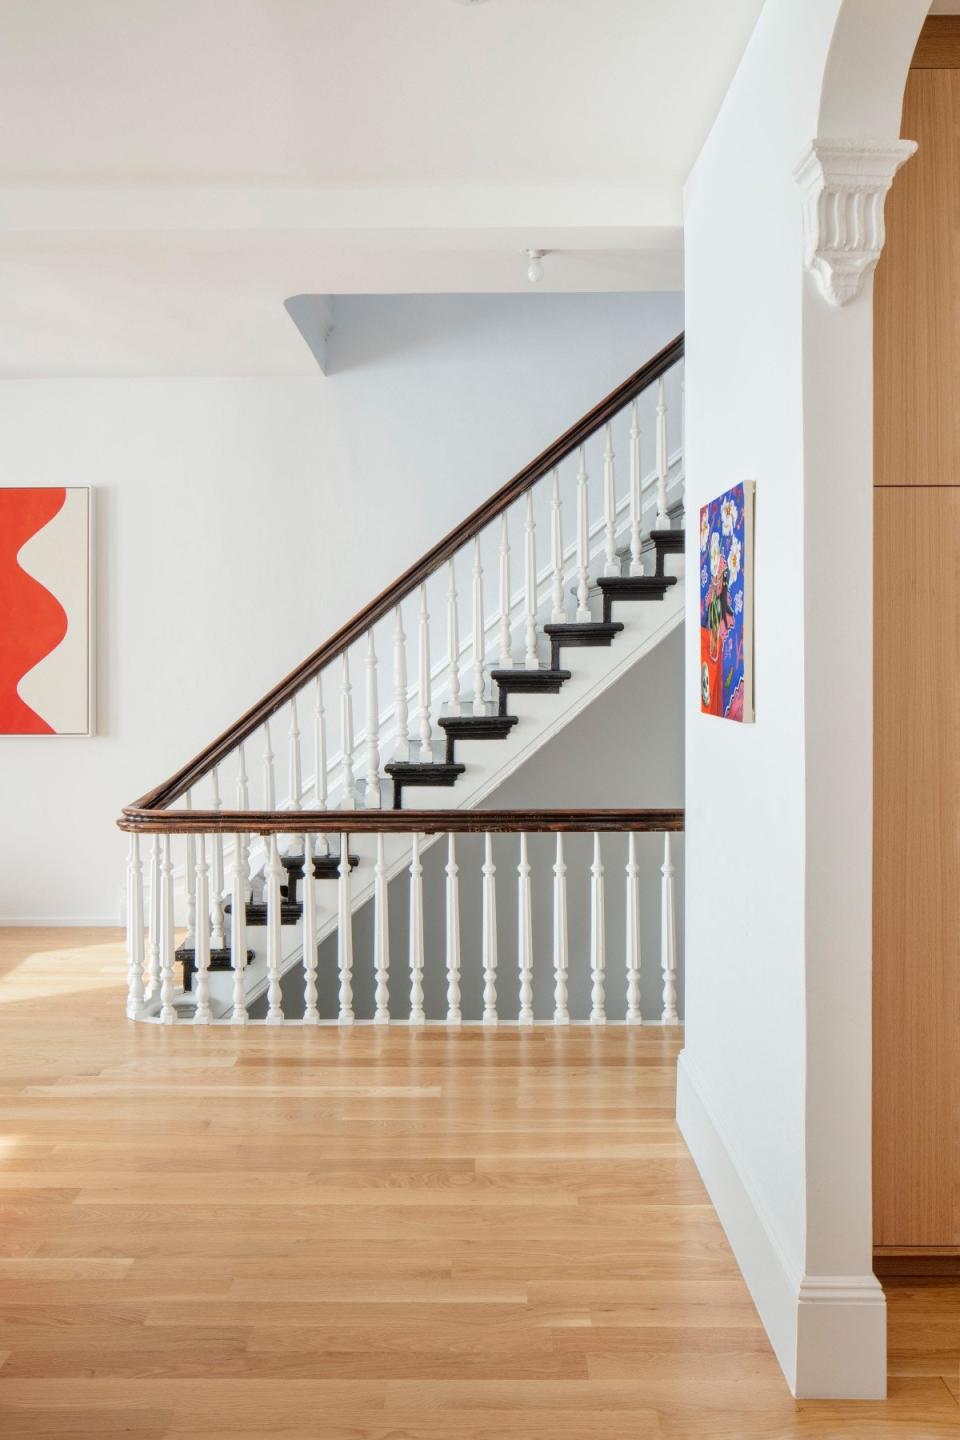 The refinished stairs are a key element to the open floor plan. The painting in the foreground is by Nikki Maloof.